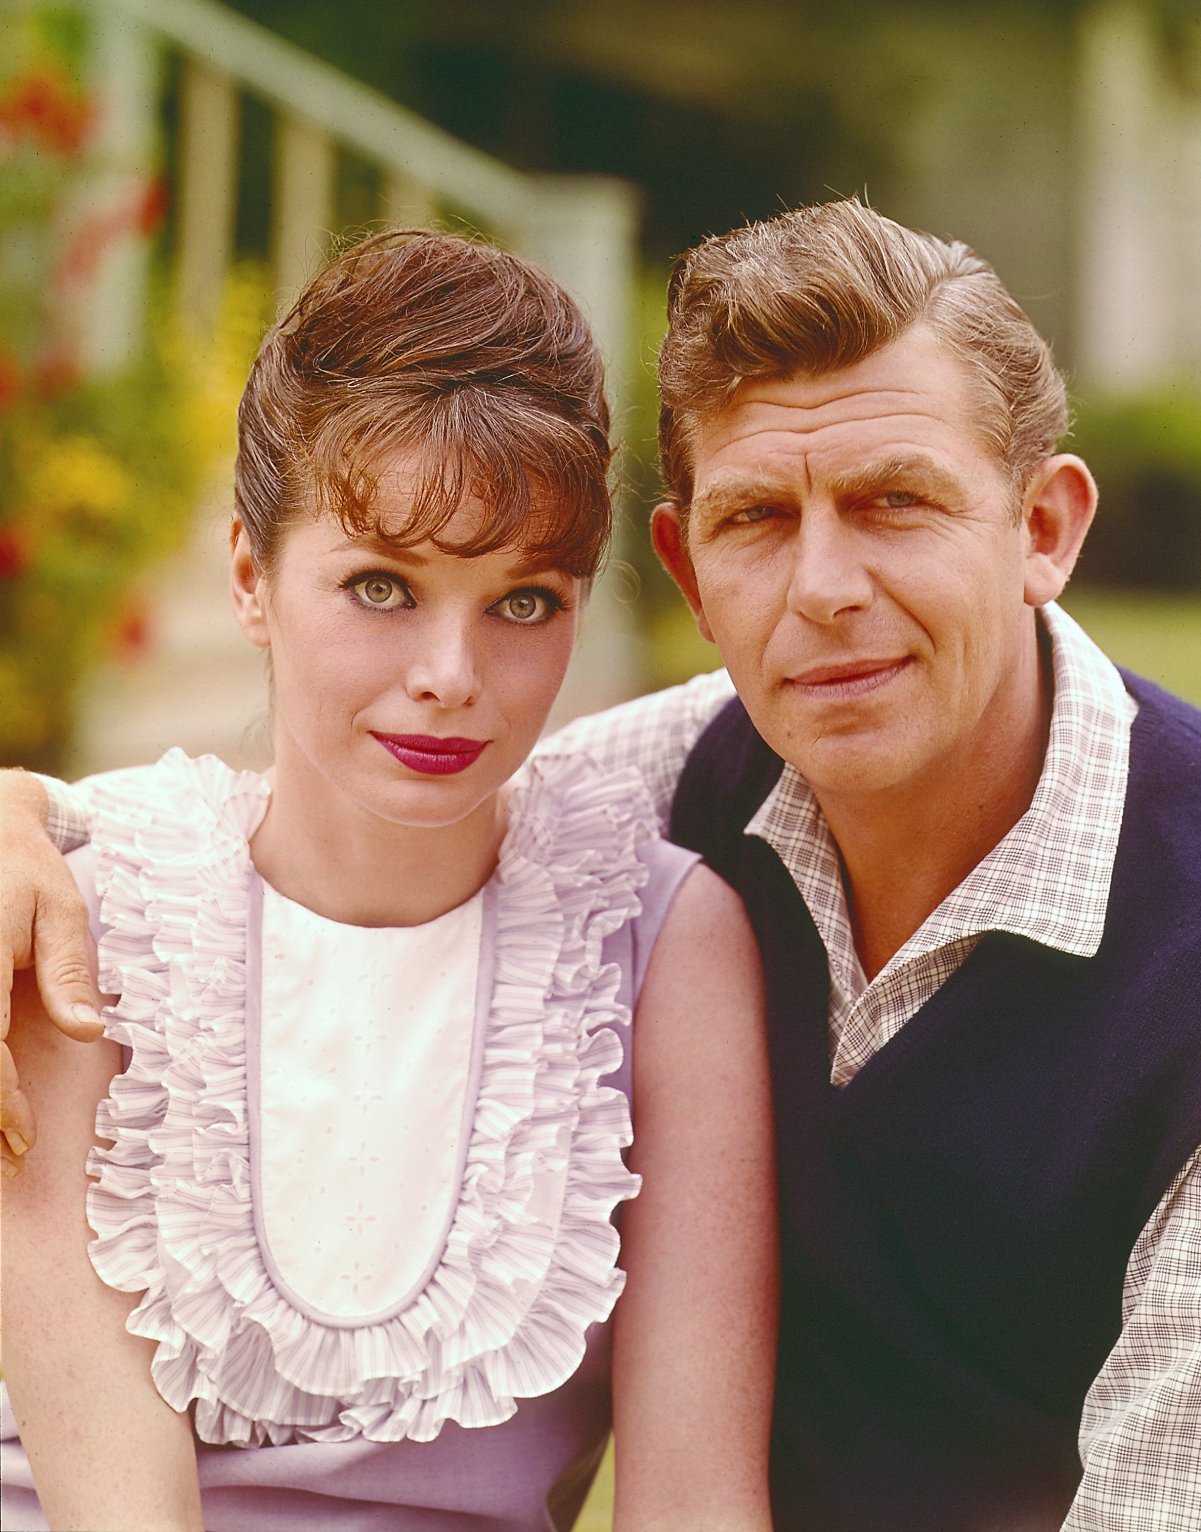 (L to R): Aneta Corsaut and Andy Griffith pose for a photo together, his arm draped around her shoulder